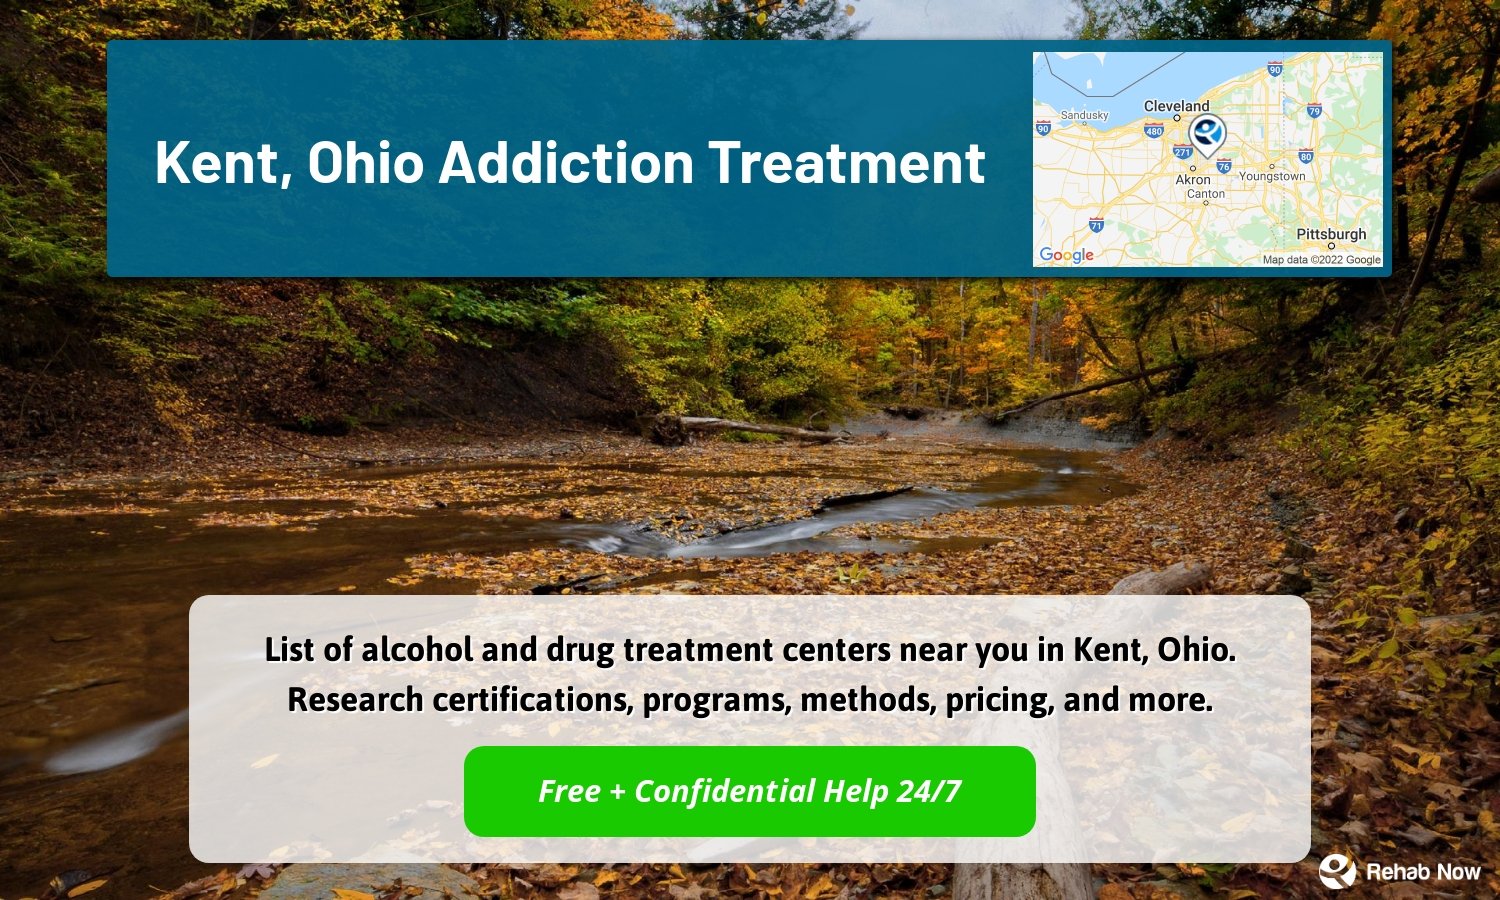 List of alcohol and drug treatment centers near you in Kent, Ohio. Research certifications, programs, methods, pricing, and more.